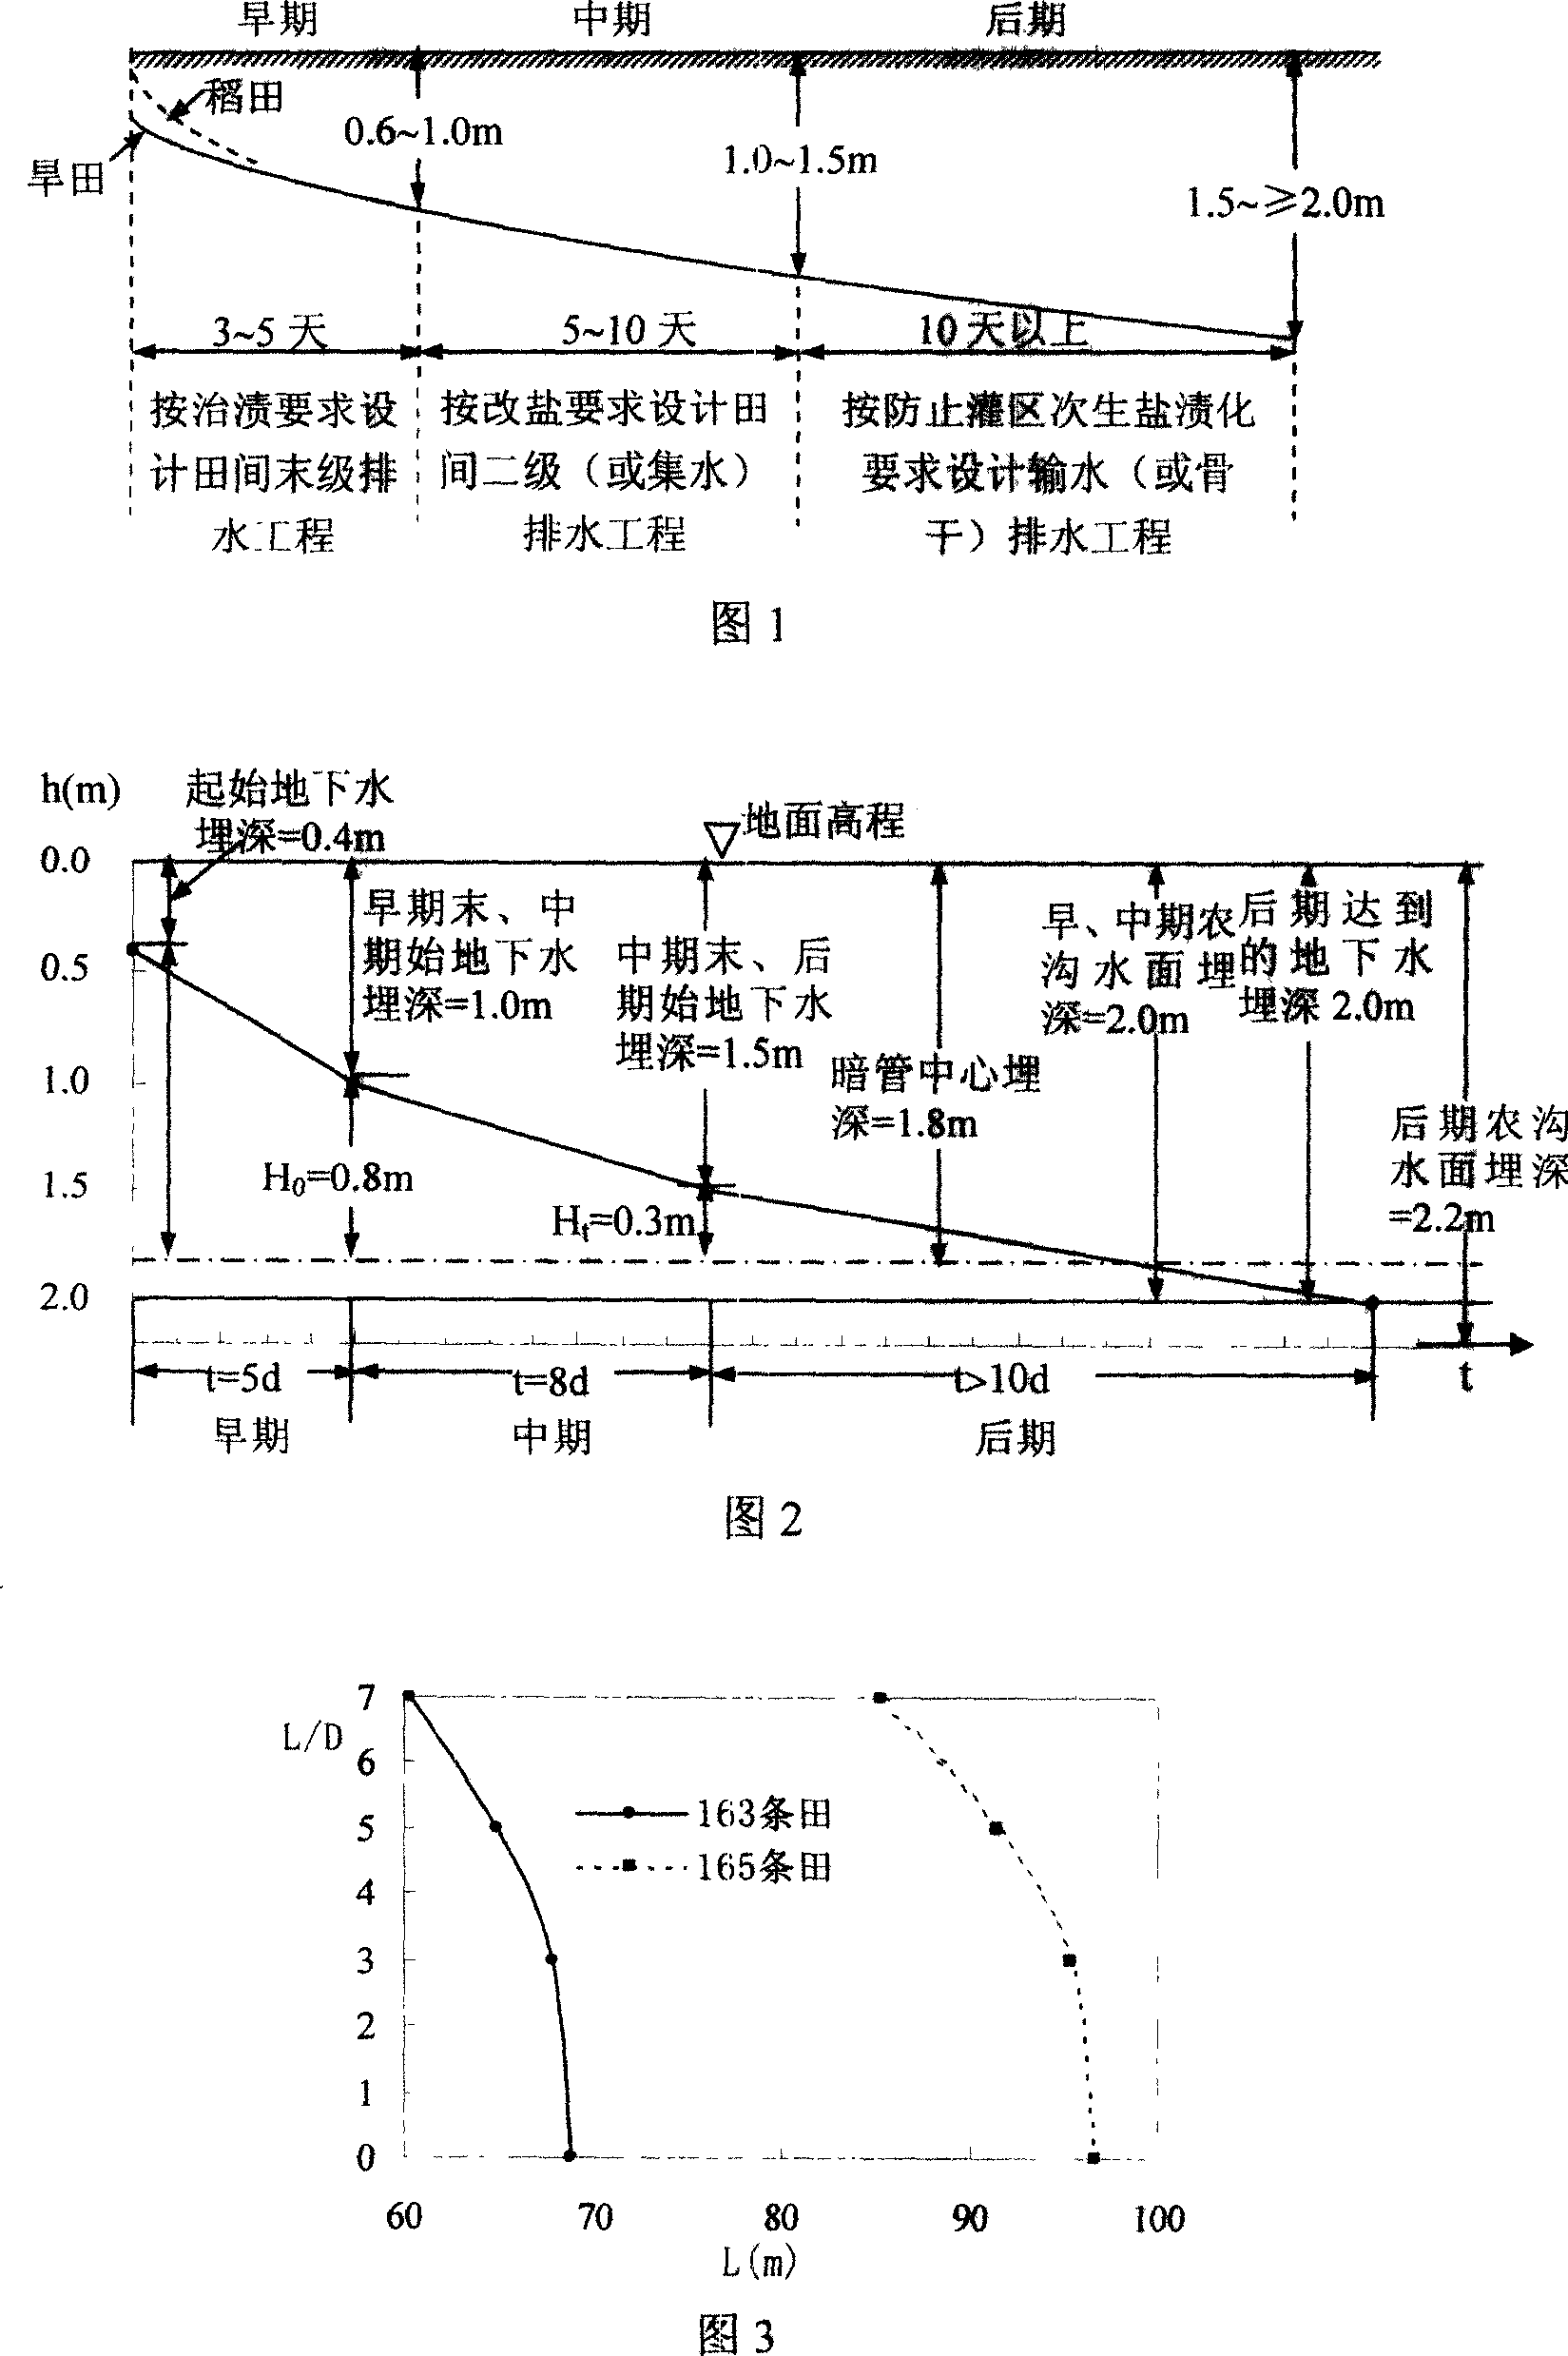 Stage and step dynamic control agricultural field drainage design method